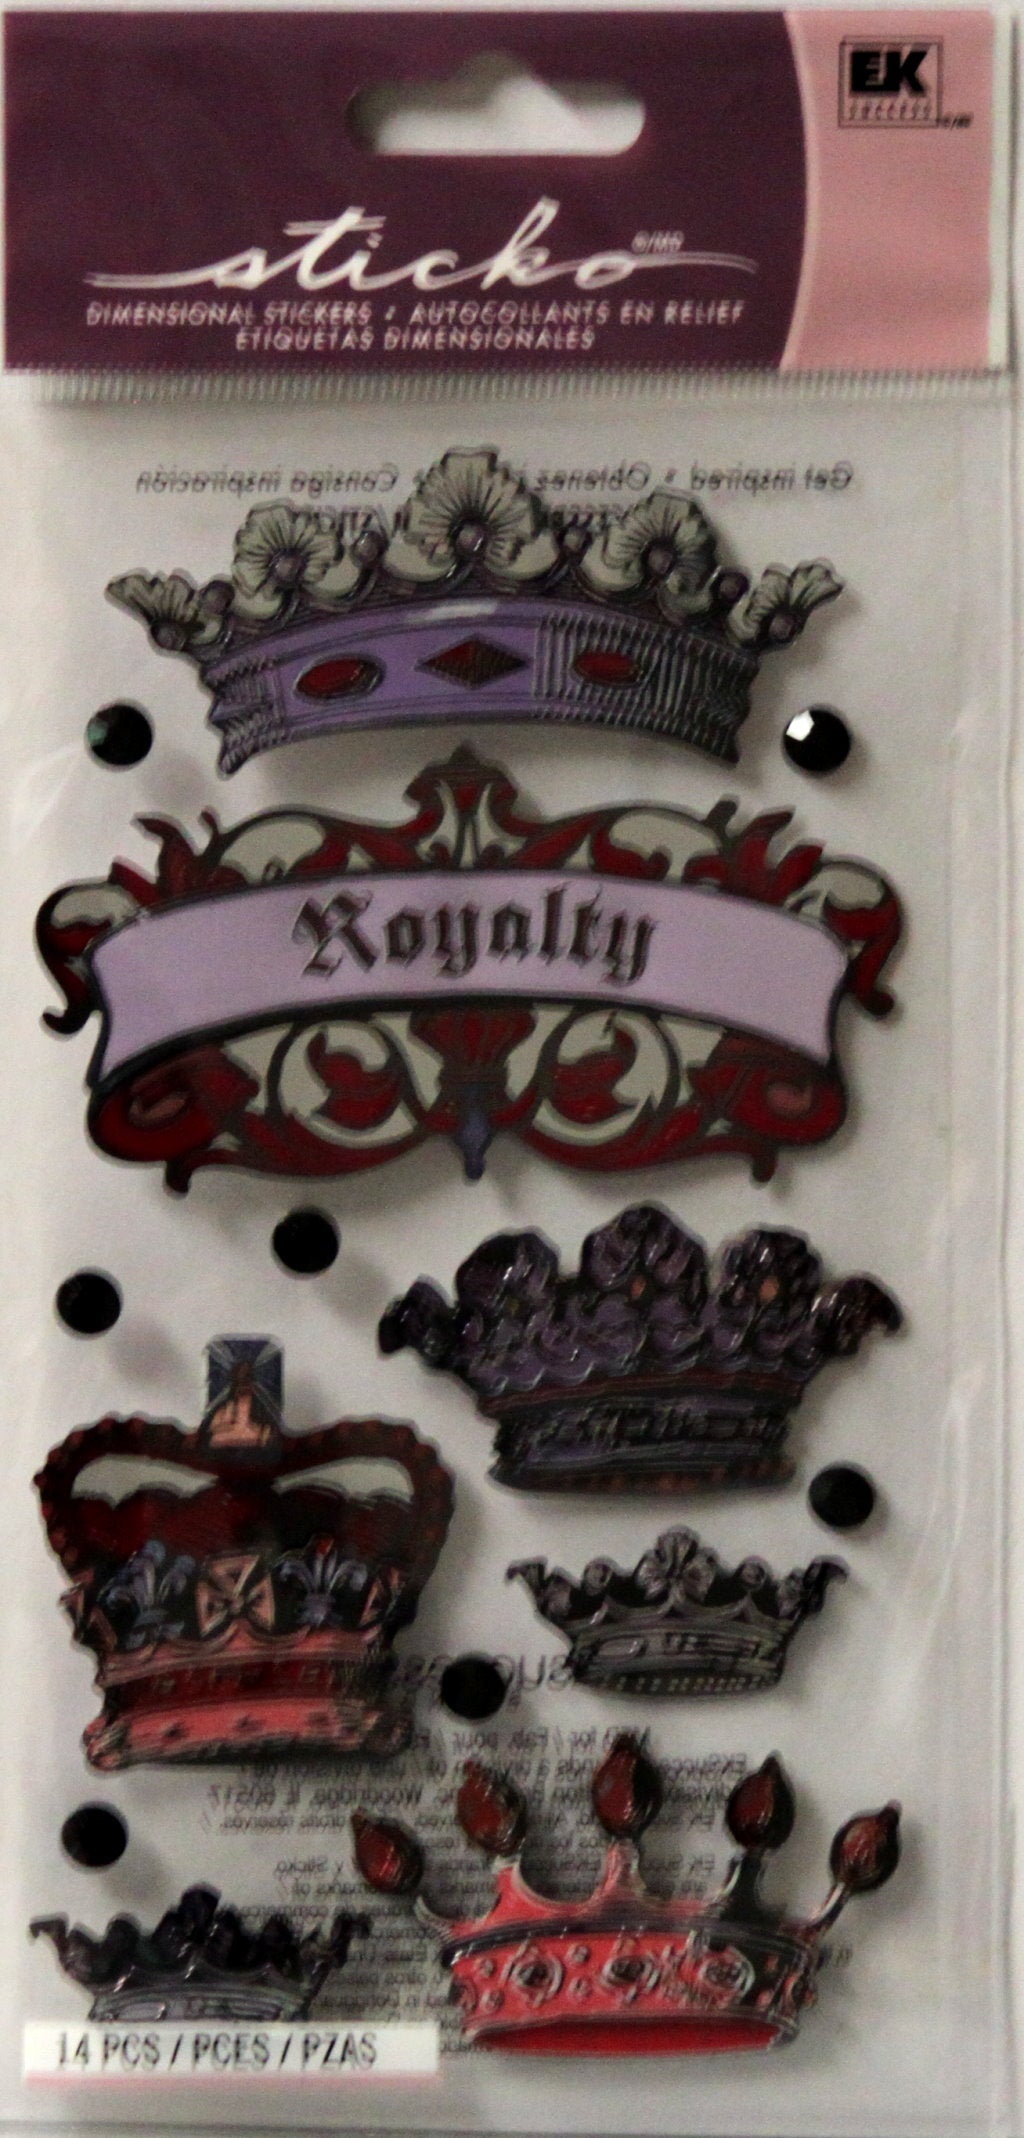 Sticko Royalty Crowns Dimensional Stickers